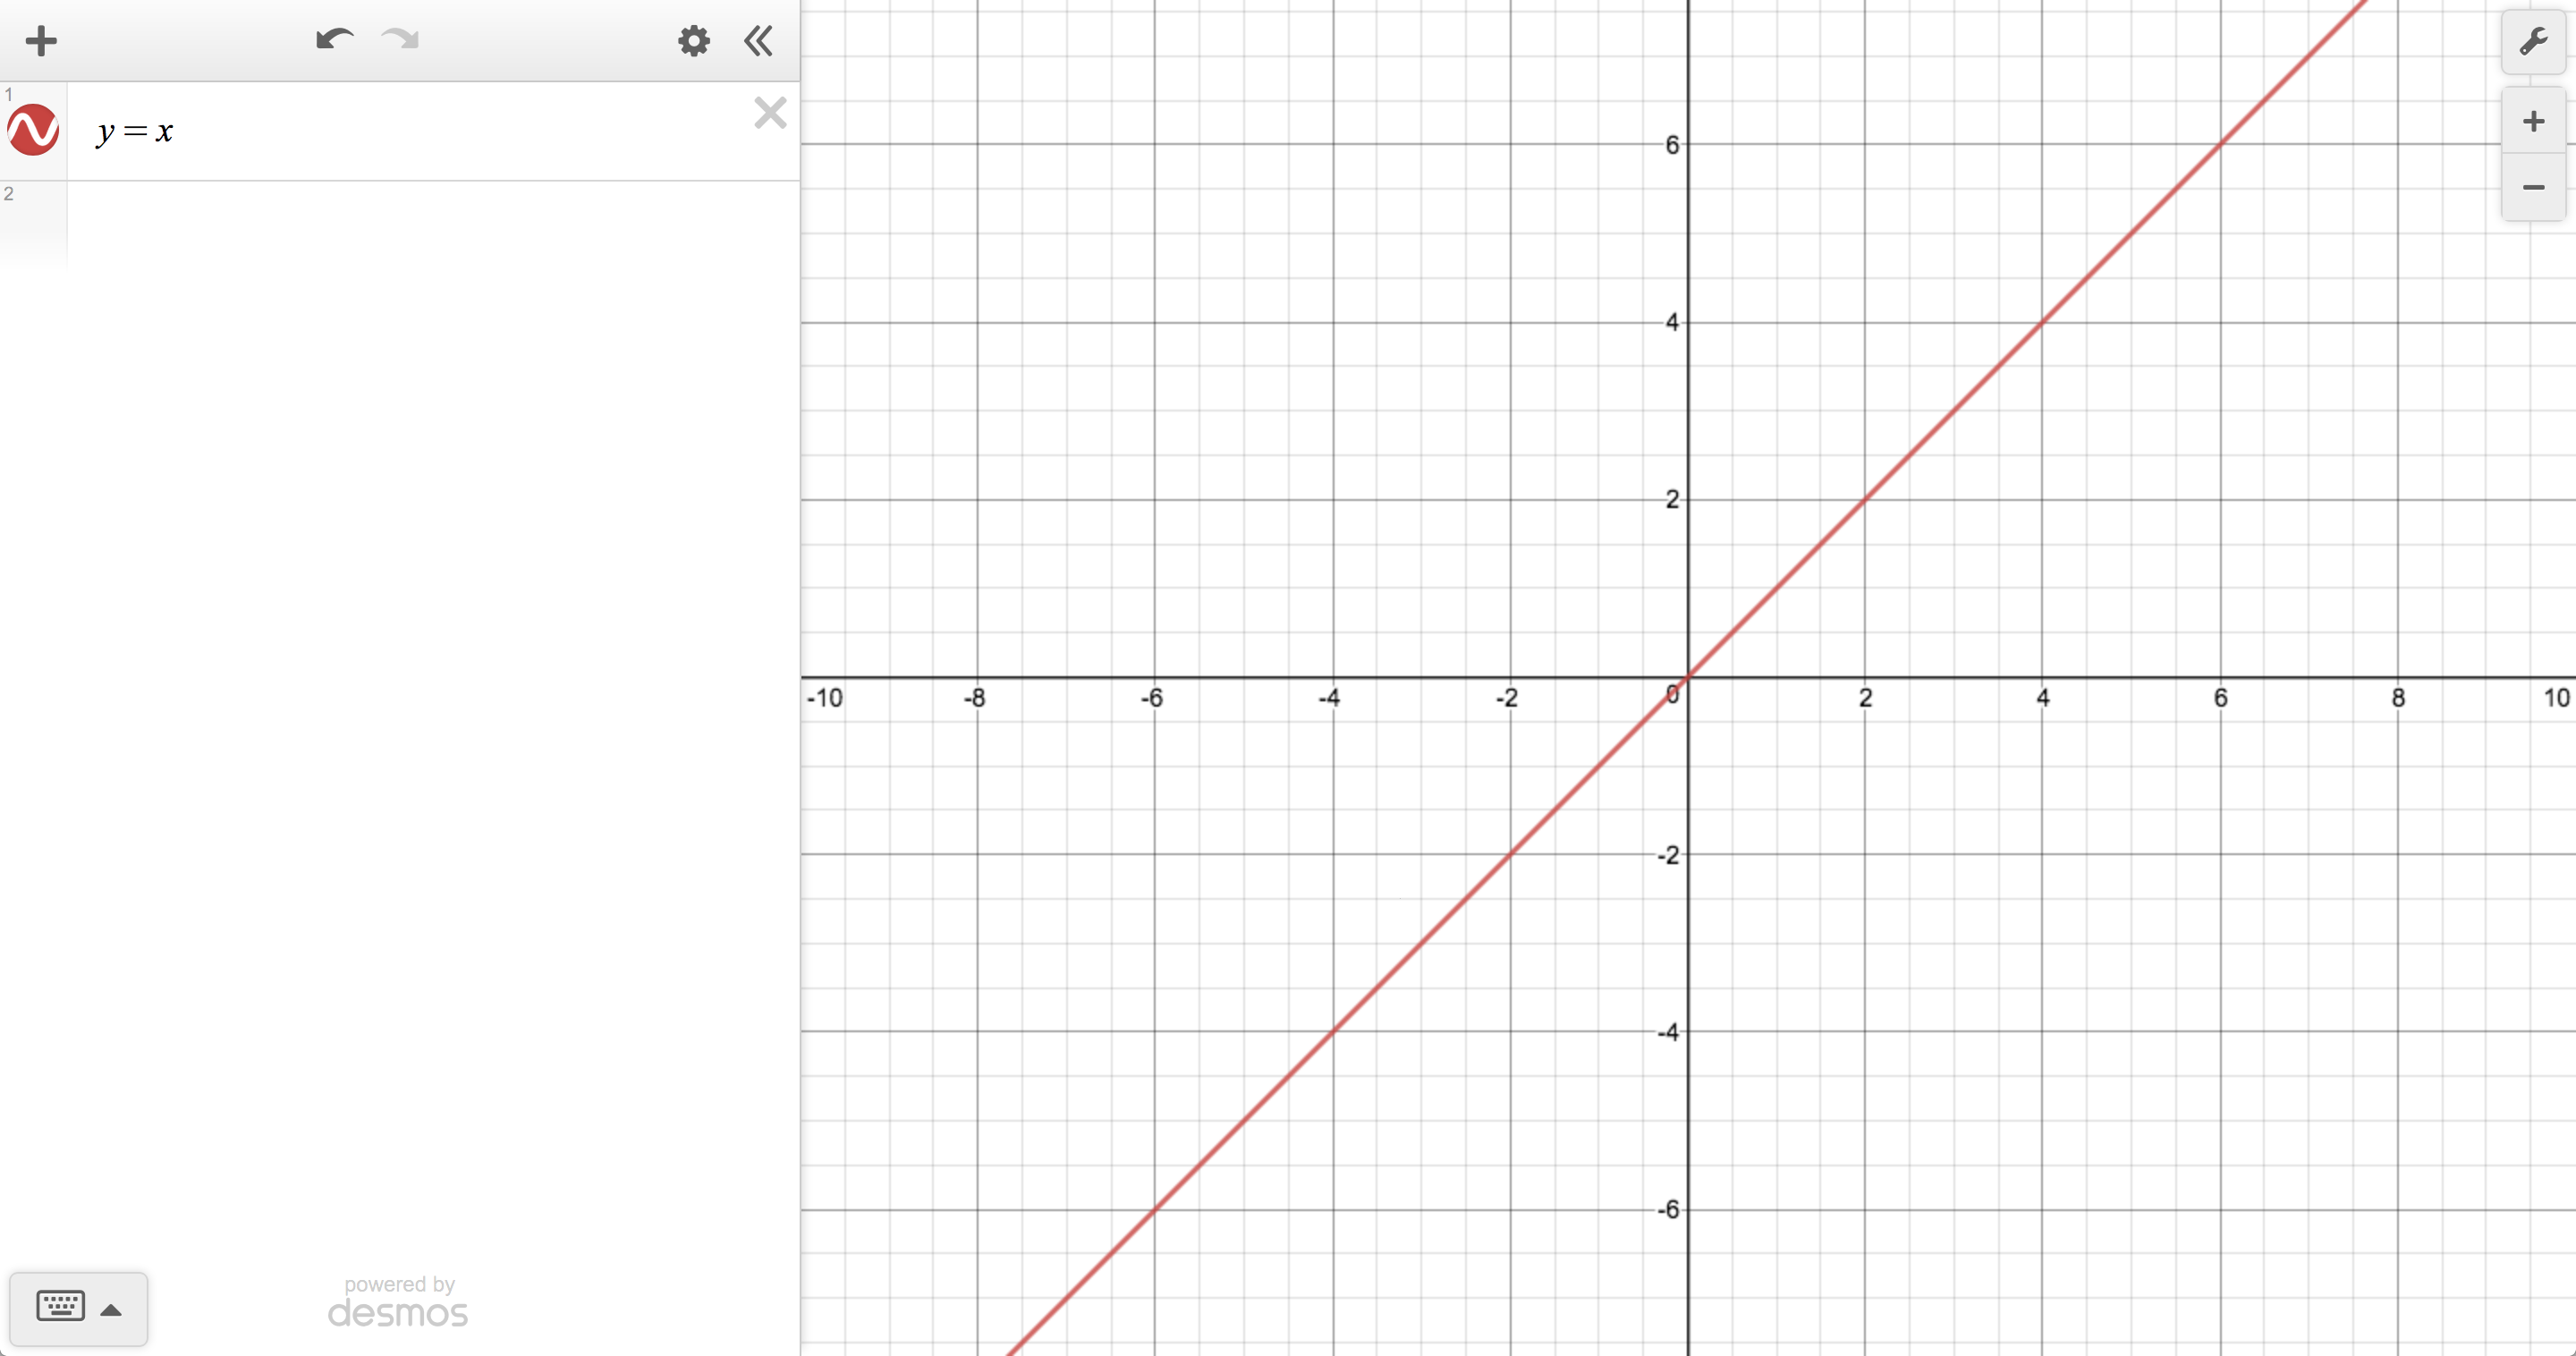 A graph of the line "y=x".